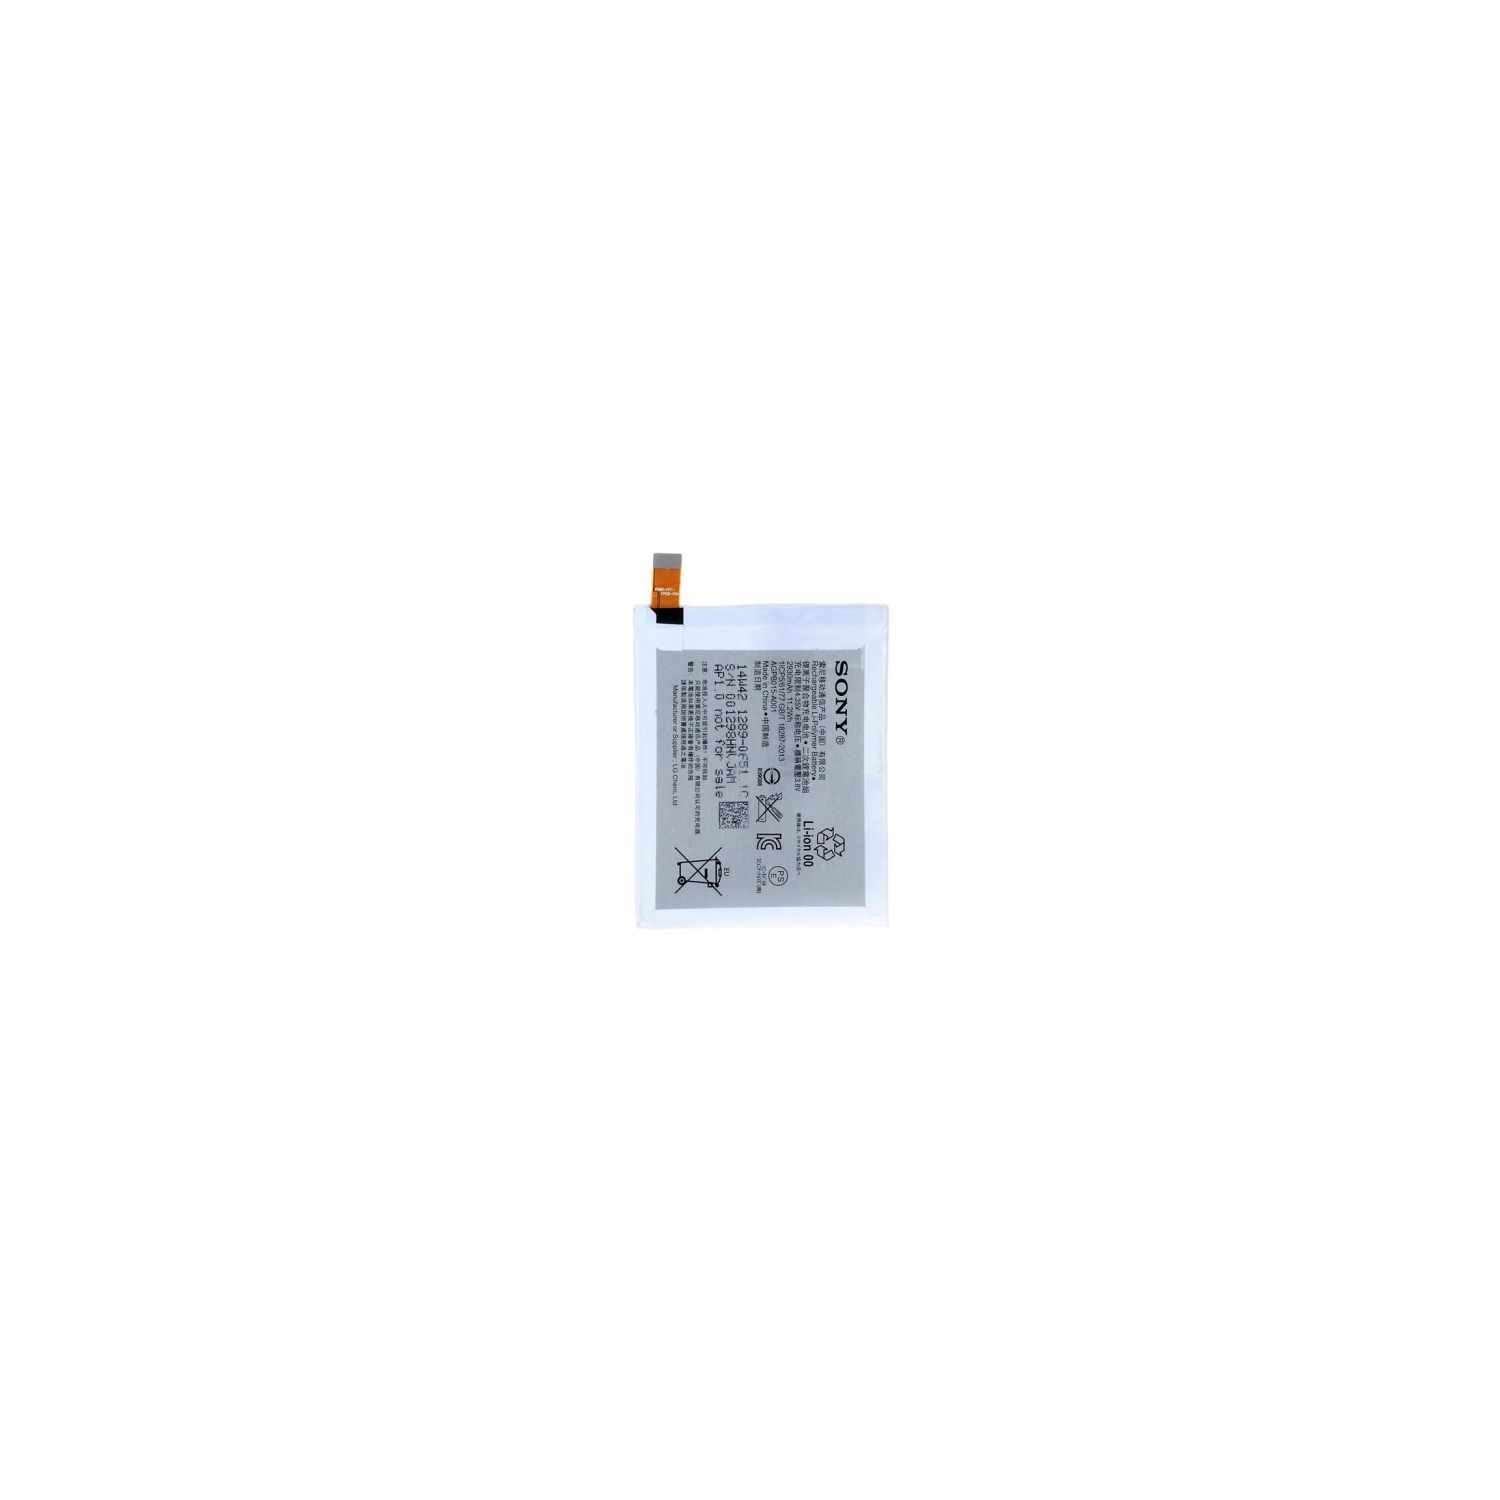 Replacement Battery for Sony Xperia Z4 / Z3 Plus / C5 Ultra, E6553 LIS1579ERPC